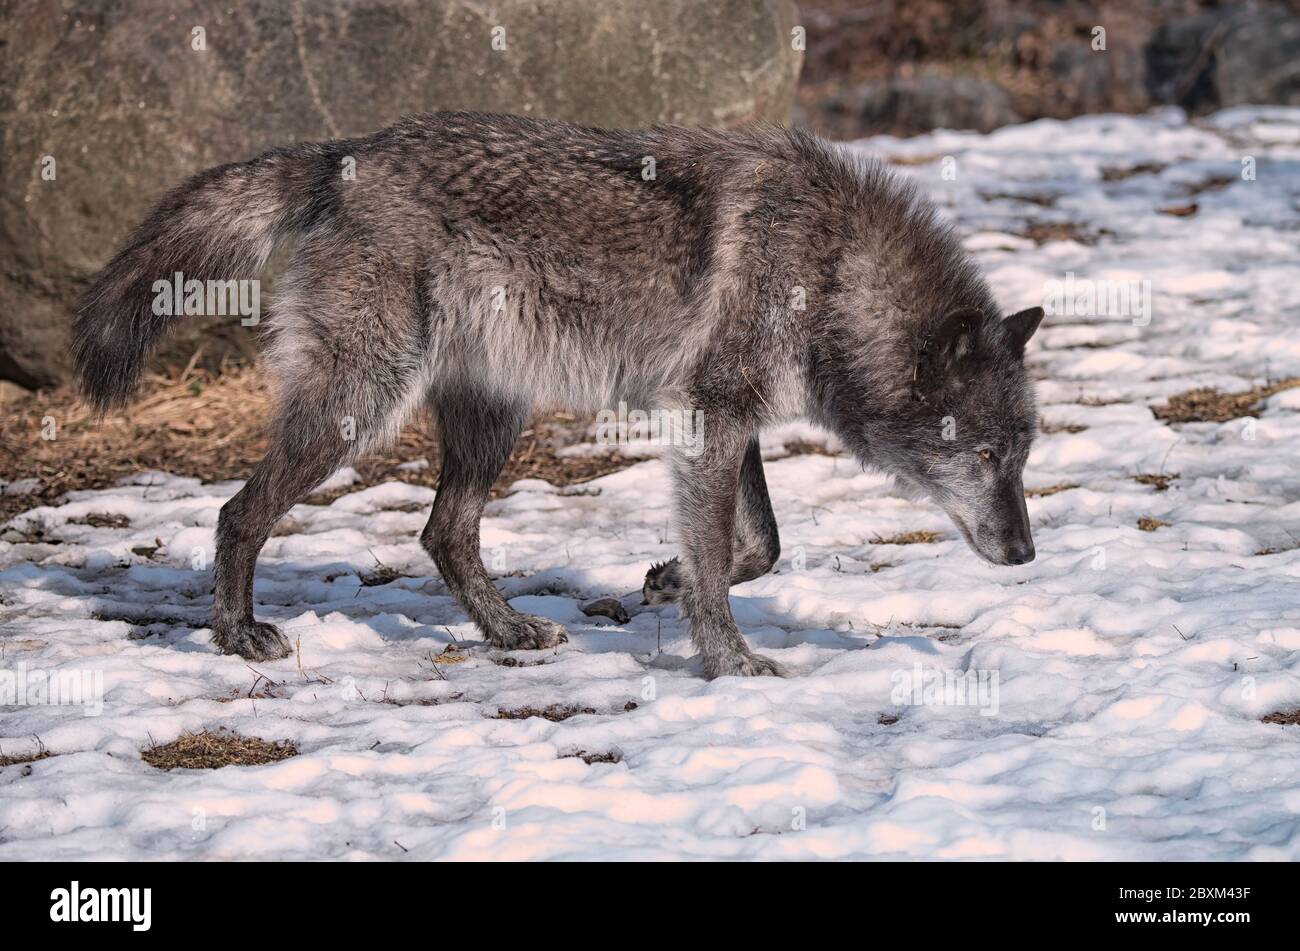 Black Timber Wolf (also known as a Gray or Grey Wolf) Walking in the Snow Stock Photo